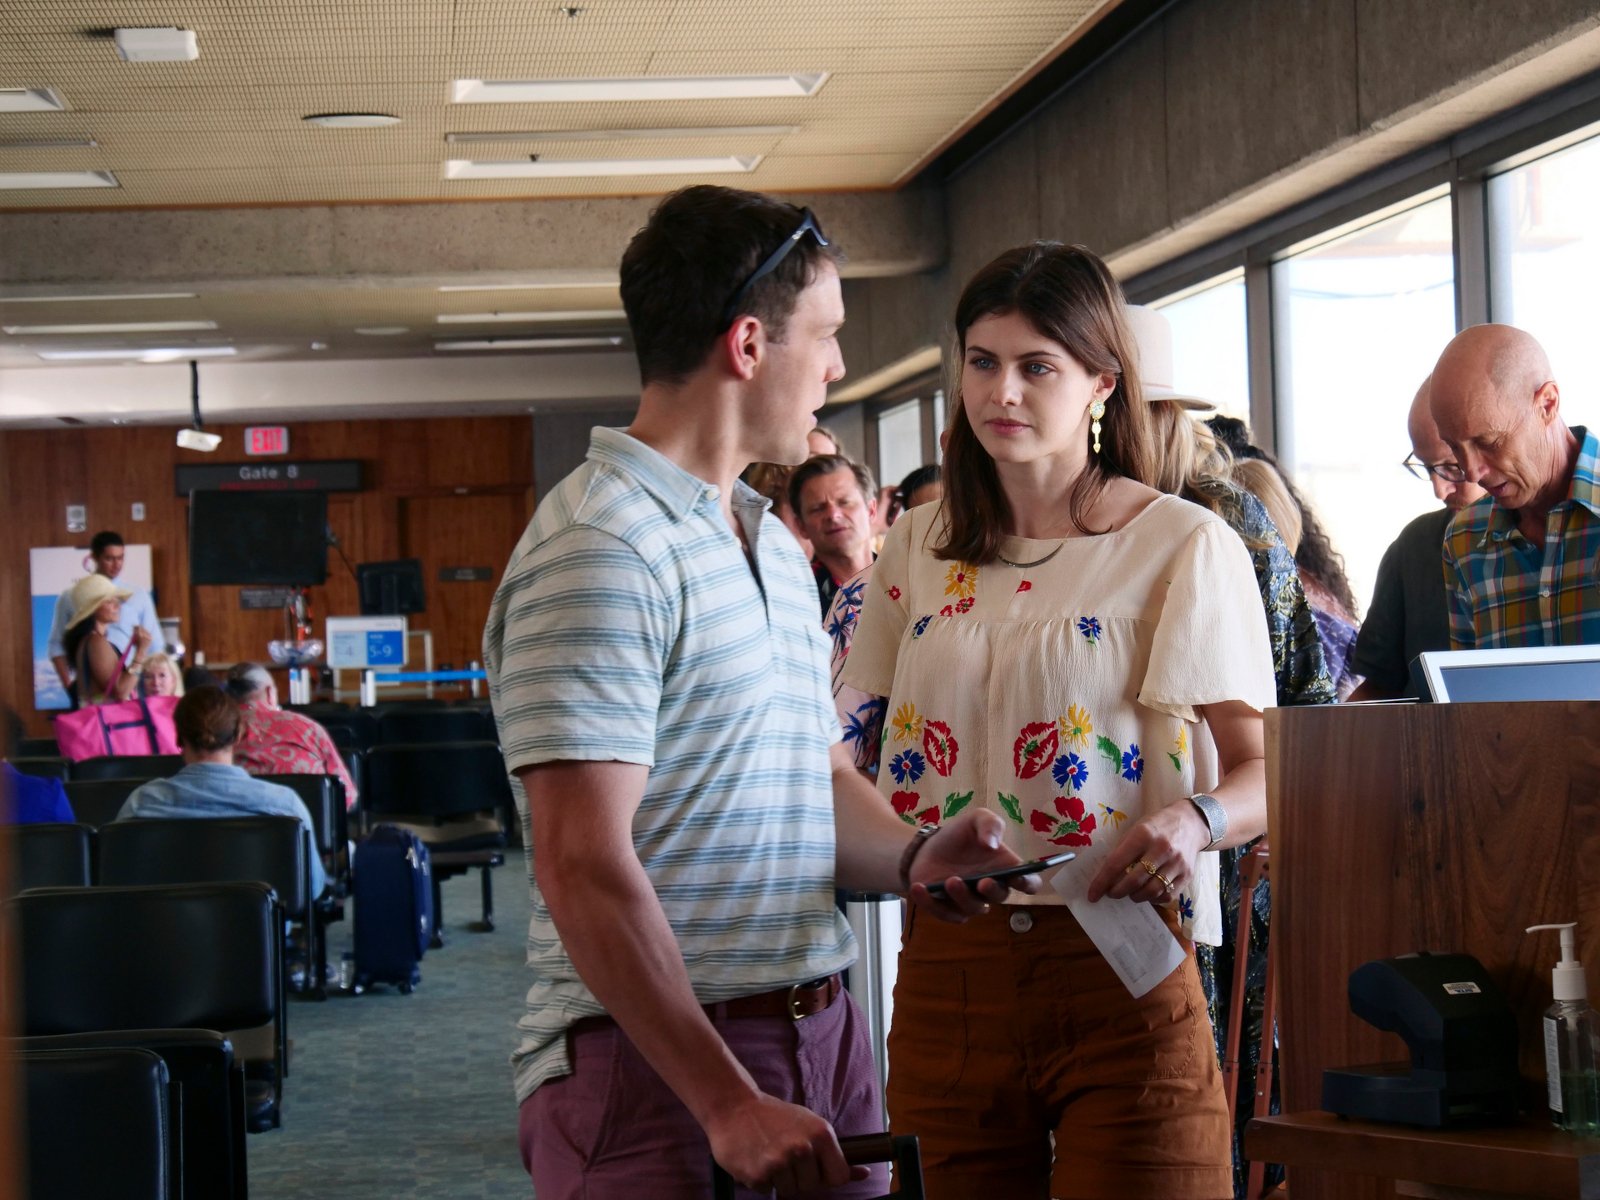 Jake Lacy and Alexandra Daddario in 'The White Lotus' Season 1 finale. Lacy's character wears a blue and white striped polo and is looking at Daddario. She's wearing a beige shirt with flowers and has red eyes from crying. They're standing in an airport.